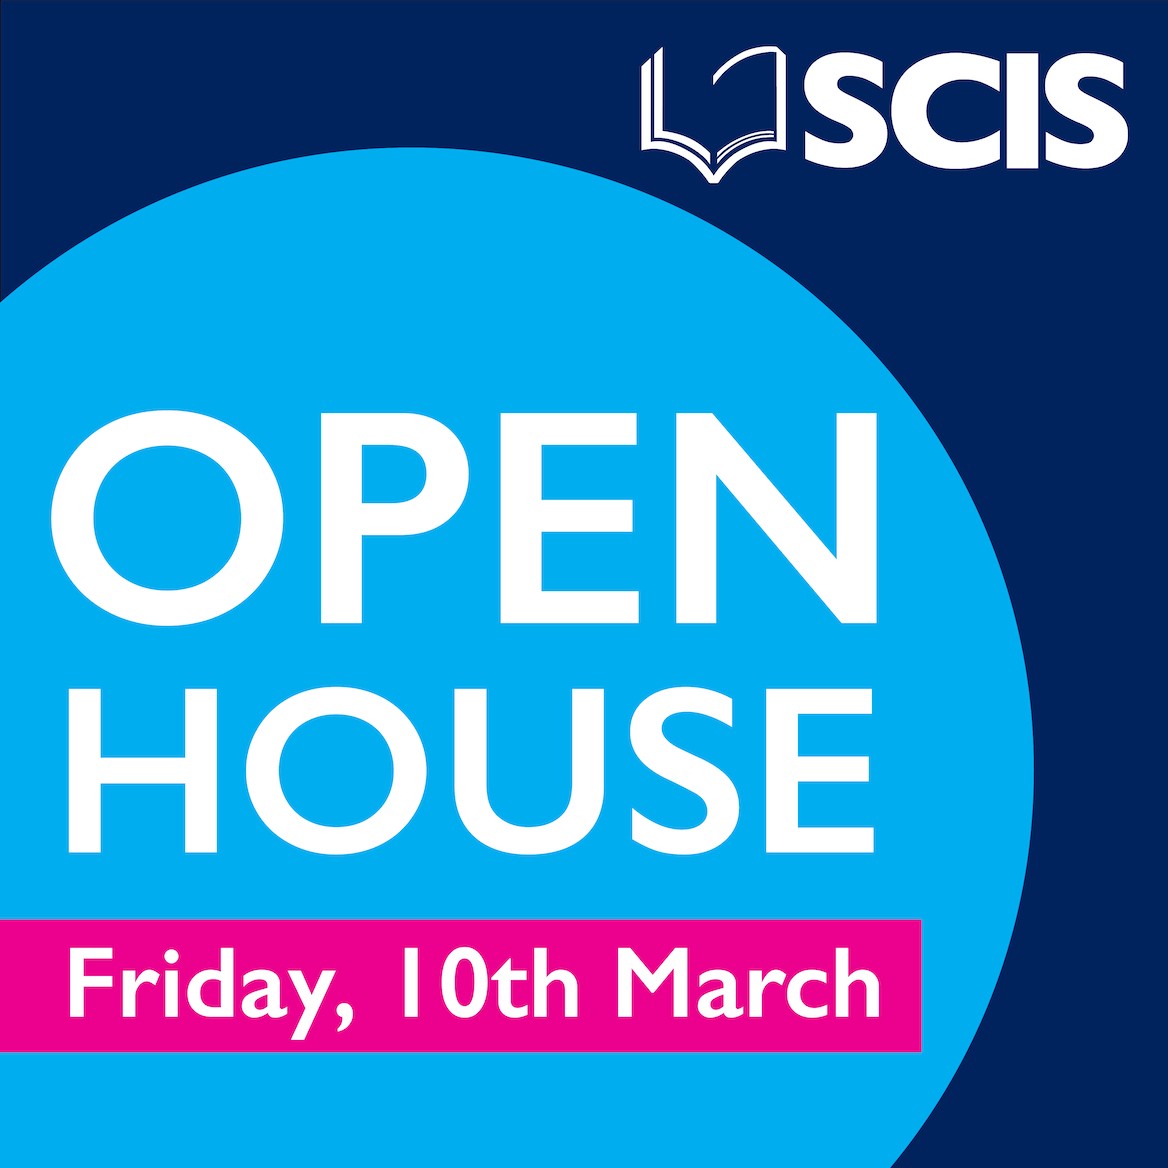 Open House | Meet the SCIS Community on March 10